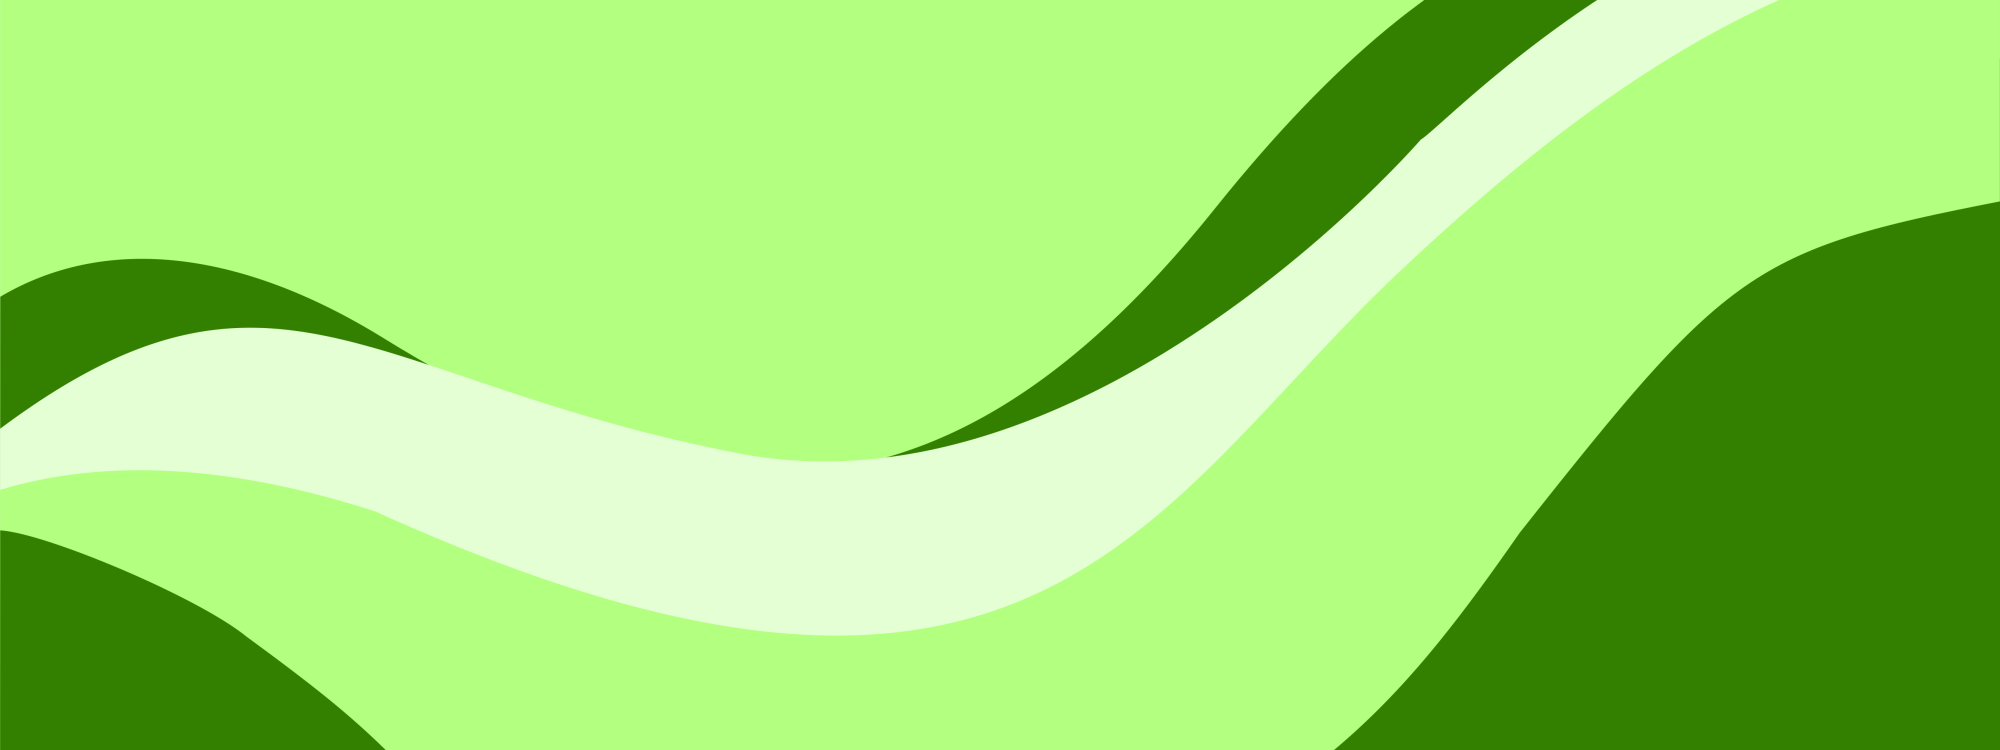 A background banner with wavy shapes each in a different shade of green